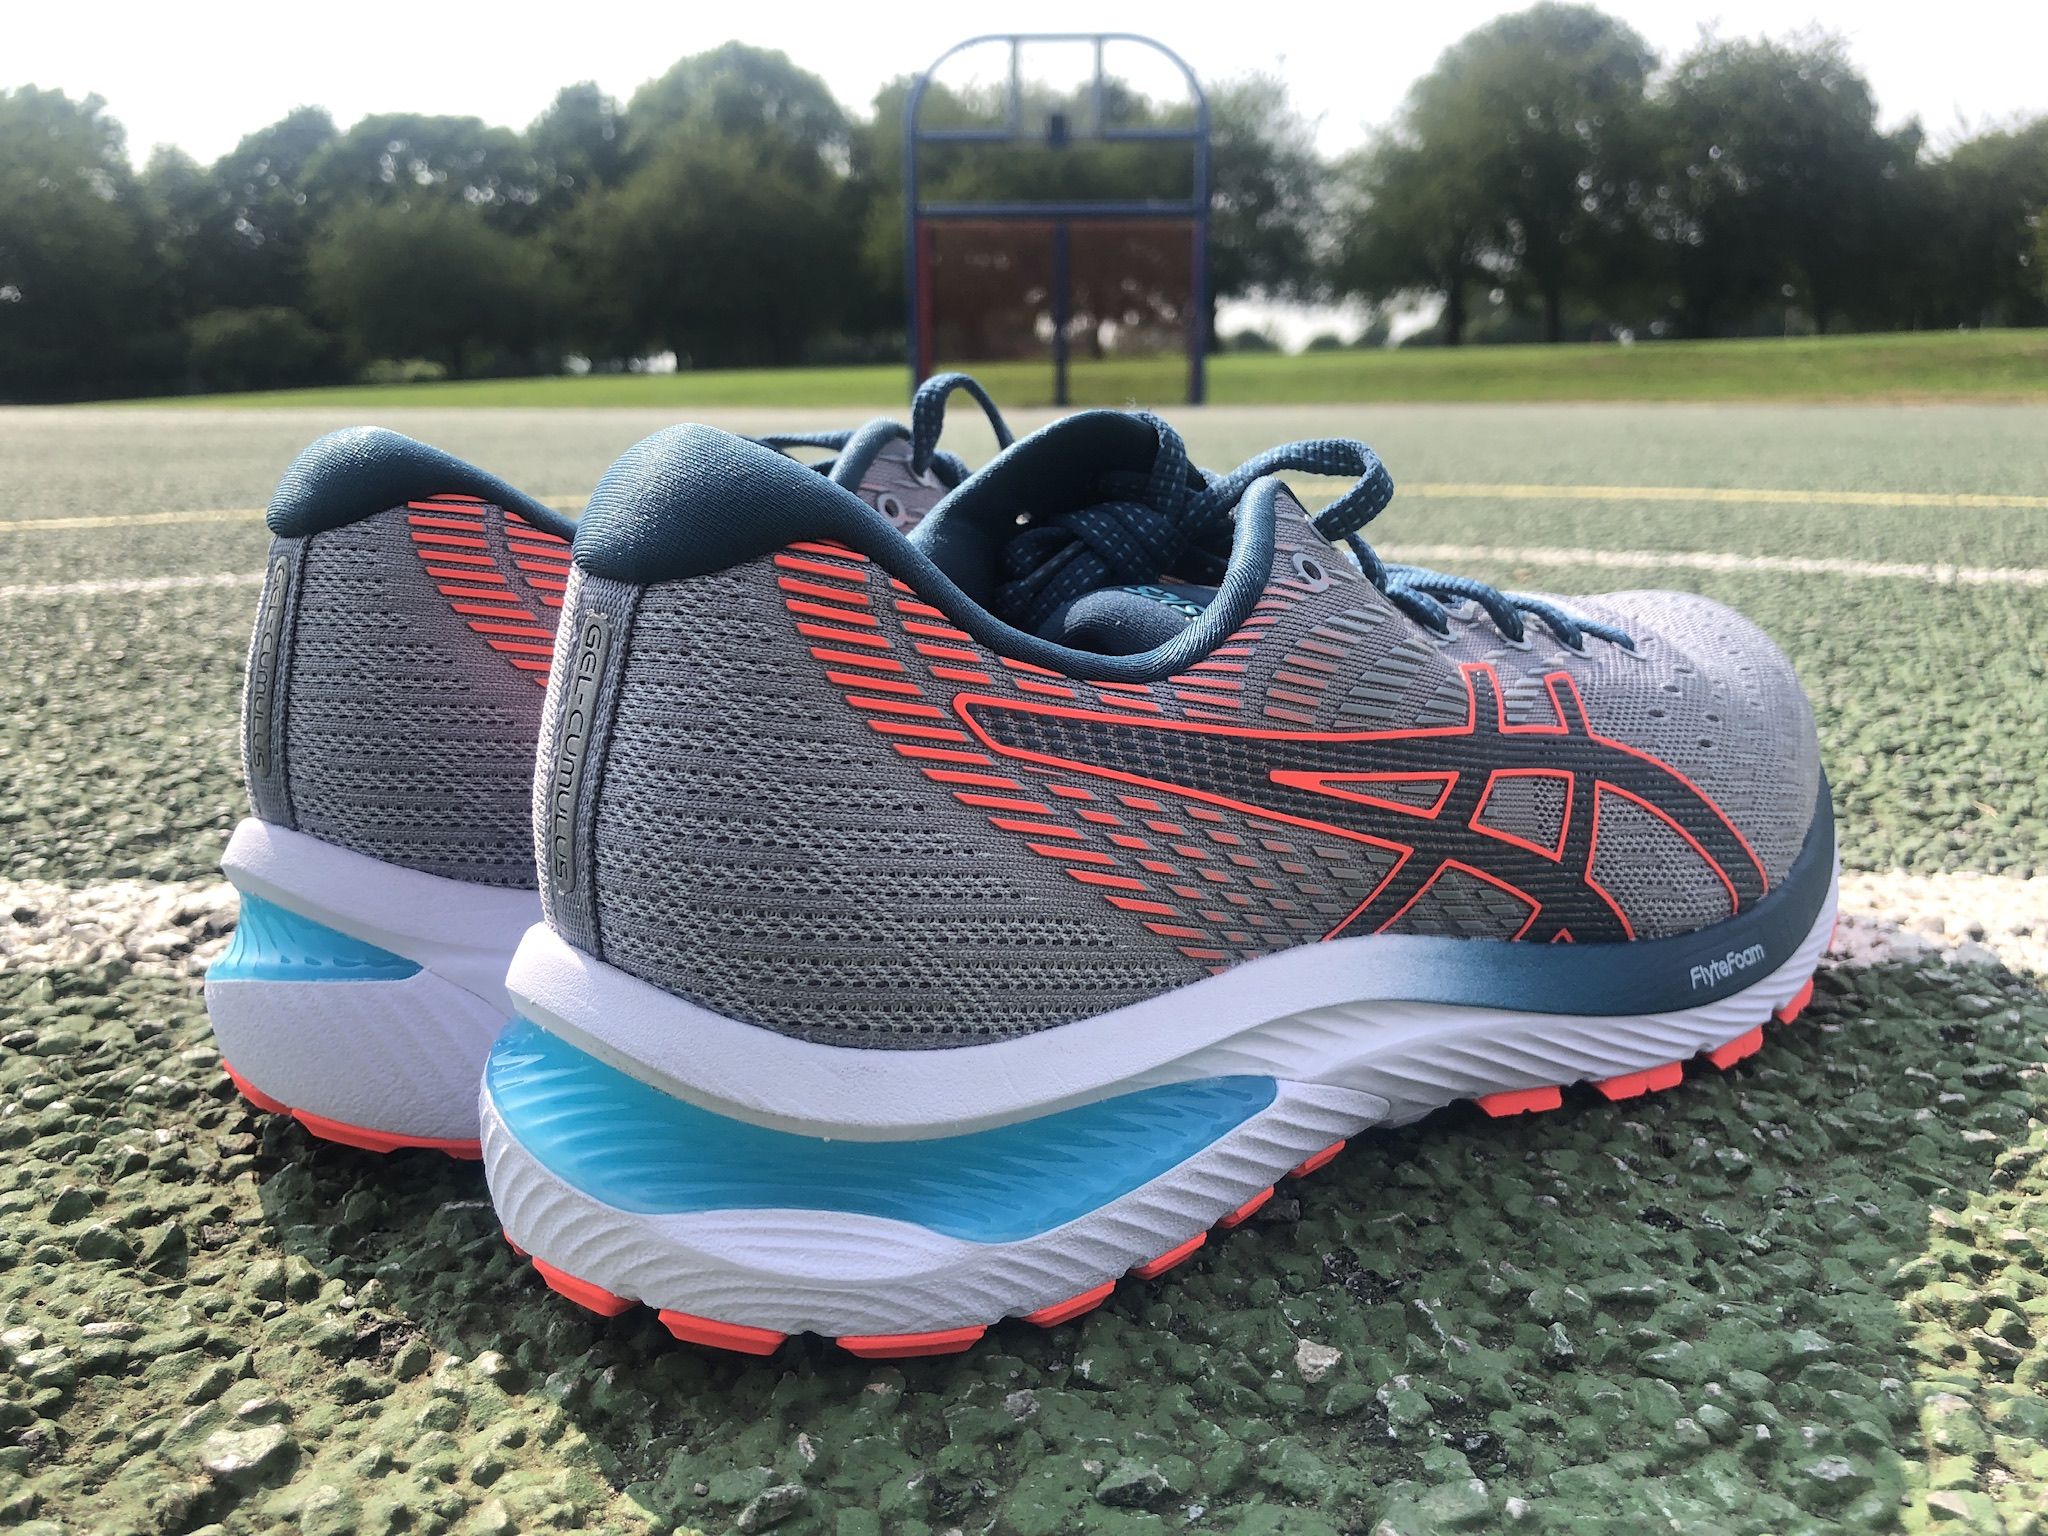 ASICS FrontRunner - My Perfect Pair of Running Shoes!